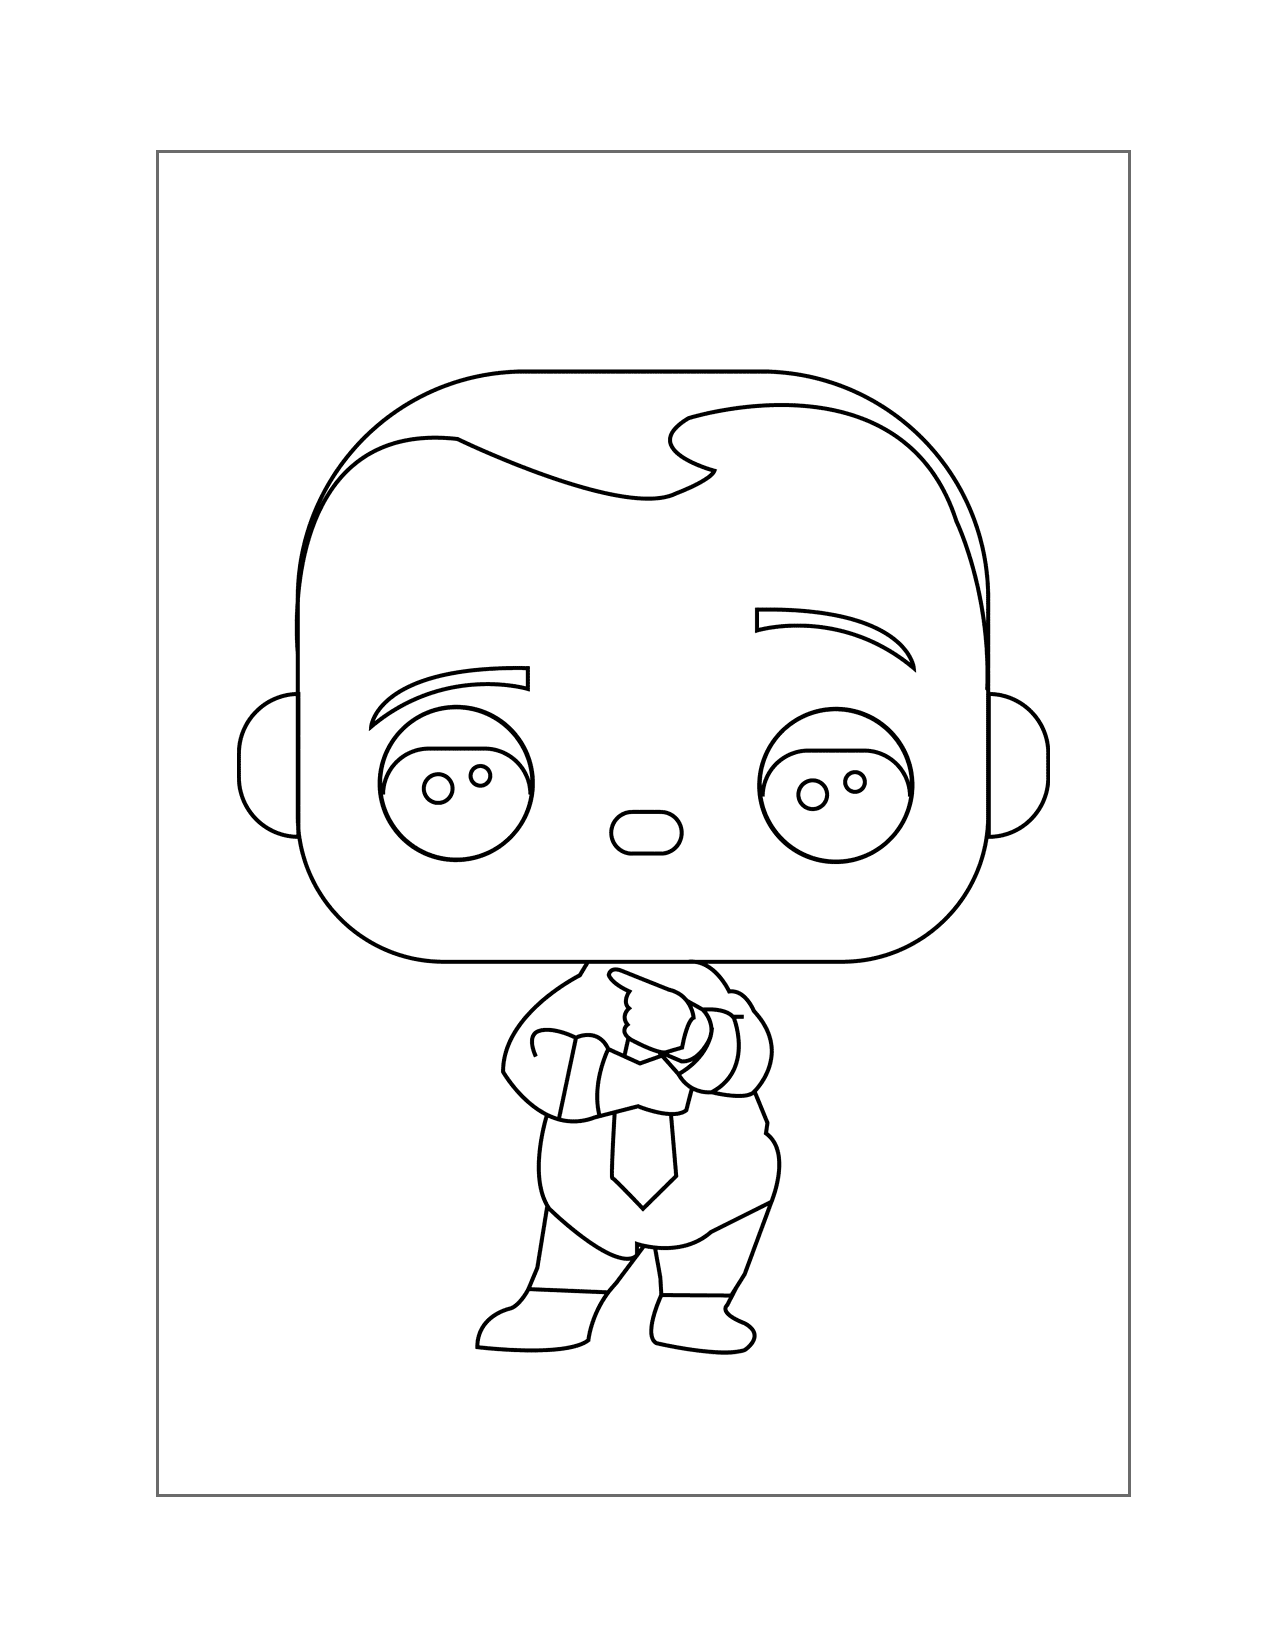 Boss Baby Funko Pop Coloring Page